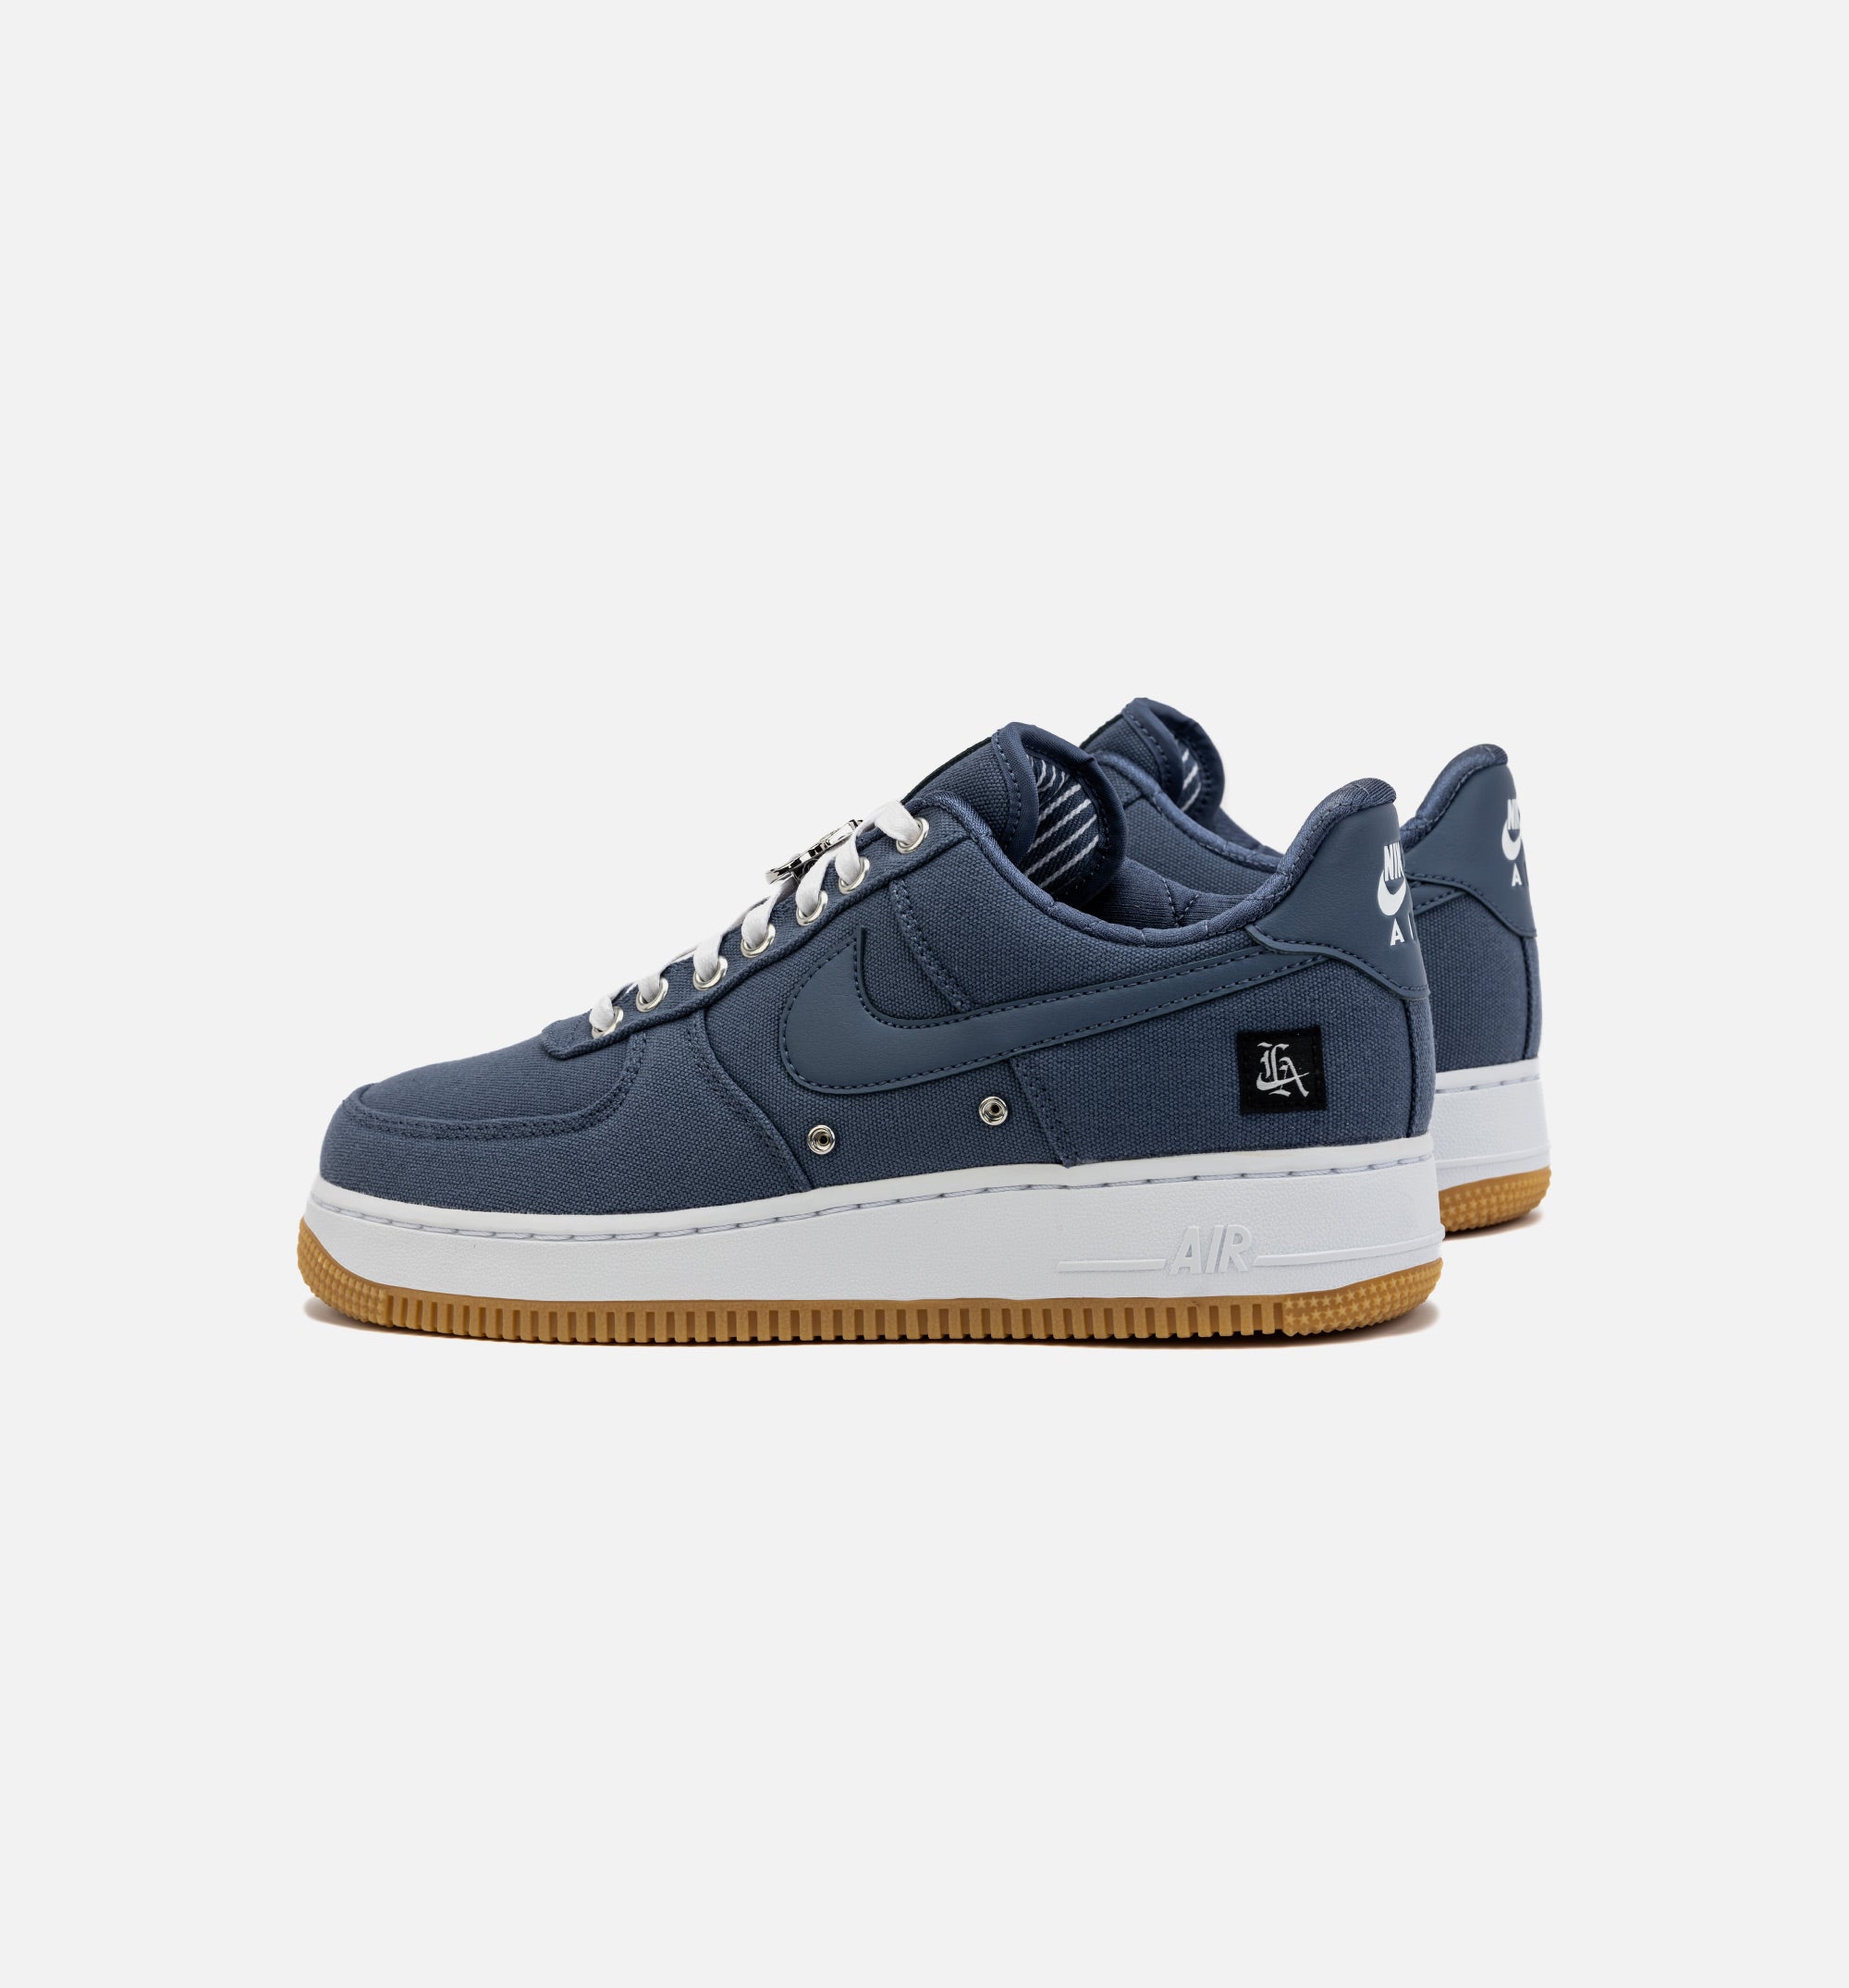 Men's Nike Air Force 1 All For 1 - Los Angeles